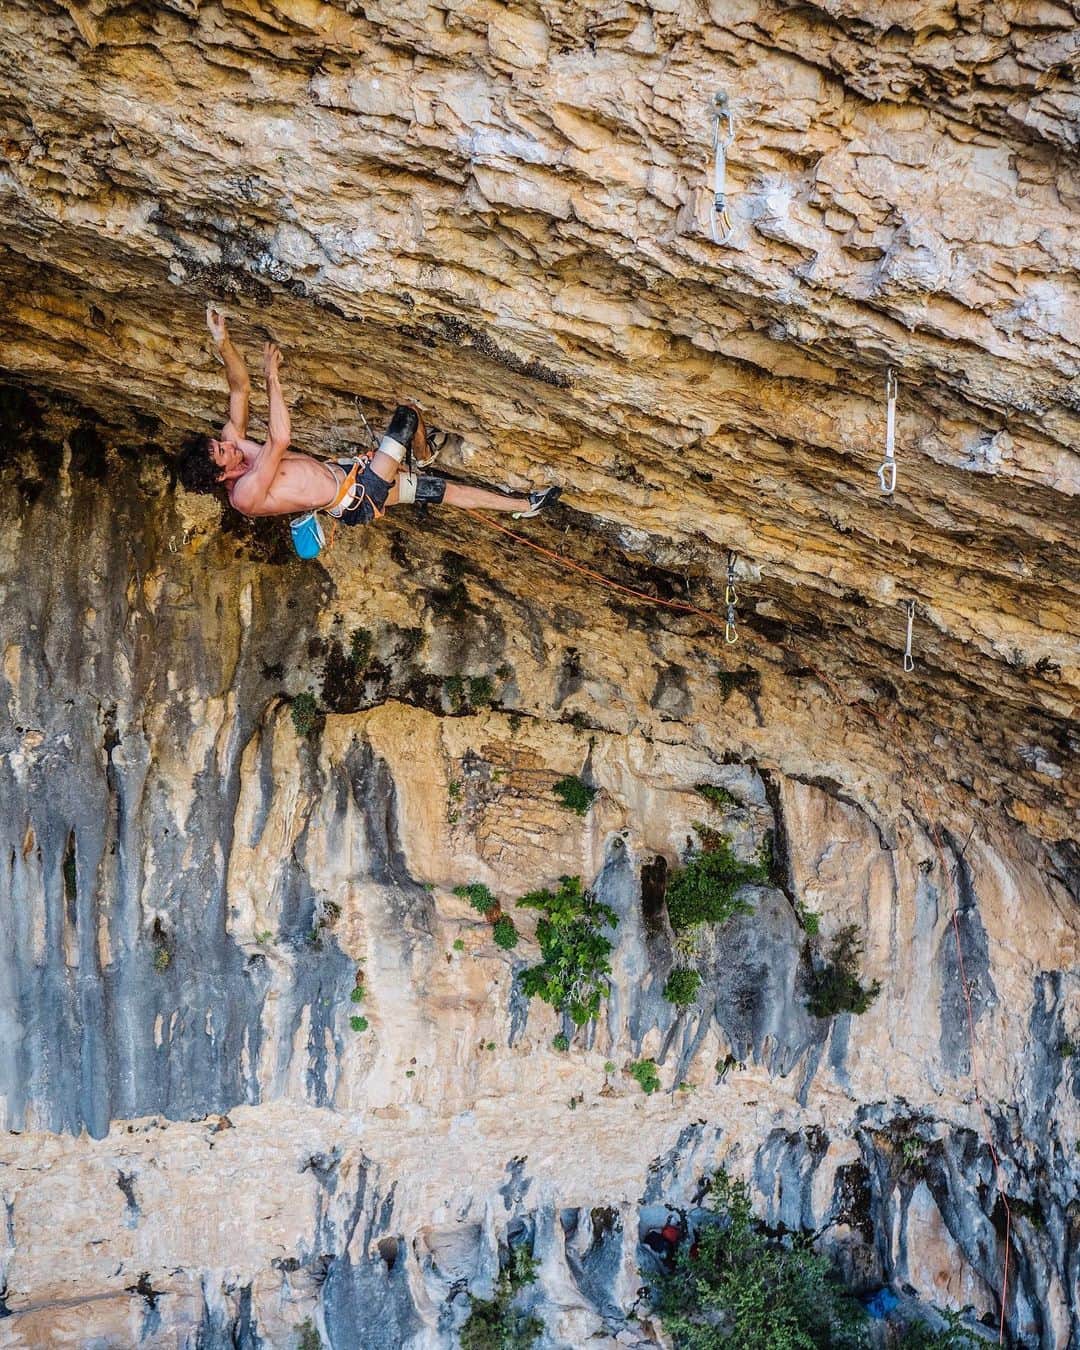 デイブ・グラハムさんのインスタグラム写真 - (デイブ・グラハムInstagram)「The first month in Rodellar was pretty wild 🤪 Adapting to the massive roofs and the burly yet technical style of resistance climbing took some learning, but adjusting to the average temperature of around 35 C was a total trip, WOW 🥵😂 !!! There were some minor hiccups, notably tweaking my MCL in a Kneebar (first time for everything 🙄) and then getting bitten by a large Golden Retriever separating a dog battle (holy shit that hurts 😣) After a chill week of healing my wounds I could find my groove again and sample some of the bigger and badder rigs of the area. Ali-Hulk Sit Extension Total [9B] is now on the list after sorting all the sections, Las Meninas [9A/+] in the Museo is an ultra sick resistance crimp line which feels attainable, as well this burly rig pictured here No Pain No Gain [9A+] 👀 Unfortunately we have no accommodation for the next couple weeks during the high season of tourism, so its time for some training, rest, and a few high octane three-day-on seshs via Cornu until we get our new Bungalow 🙄 And for anyone has been following the epic adventure this year, I have one HUGE update I’d love to share 🤗 I finally received my Spanish Residency 🥳🥳🥳 5 years legal in EU 😎!!!! Forward and Forever Onward 👐🏻 Now it’s time to finish some business here in Spain, siege the rigs as the temps drop over the next month, and get HYPE for SWITZERLAND, the next destination 🏡🌄🌌💫💎⛏🔥🤠!!!! 📸 from my homie @esteban.ele.eme 🙌🏻 @adidasterrex @fiveten_official @petzl_official @climb_up_officiel @frictionlabs @sendclimbing @tensionclimbing @alizee_dufraisse 😘」8月3日 21時26分 - dave_graham_